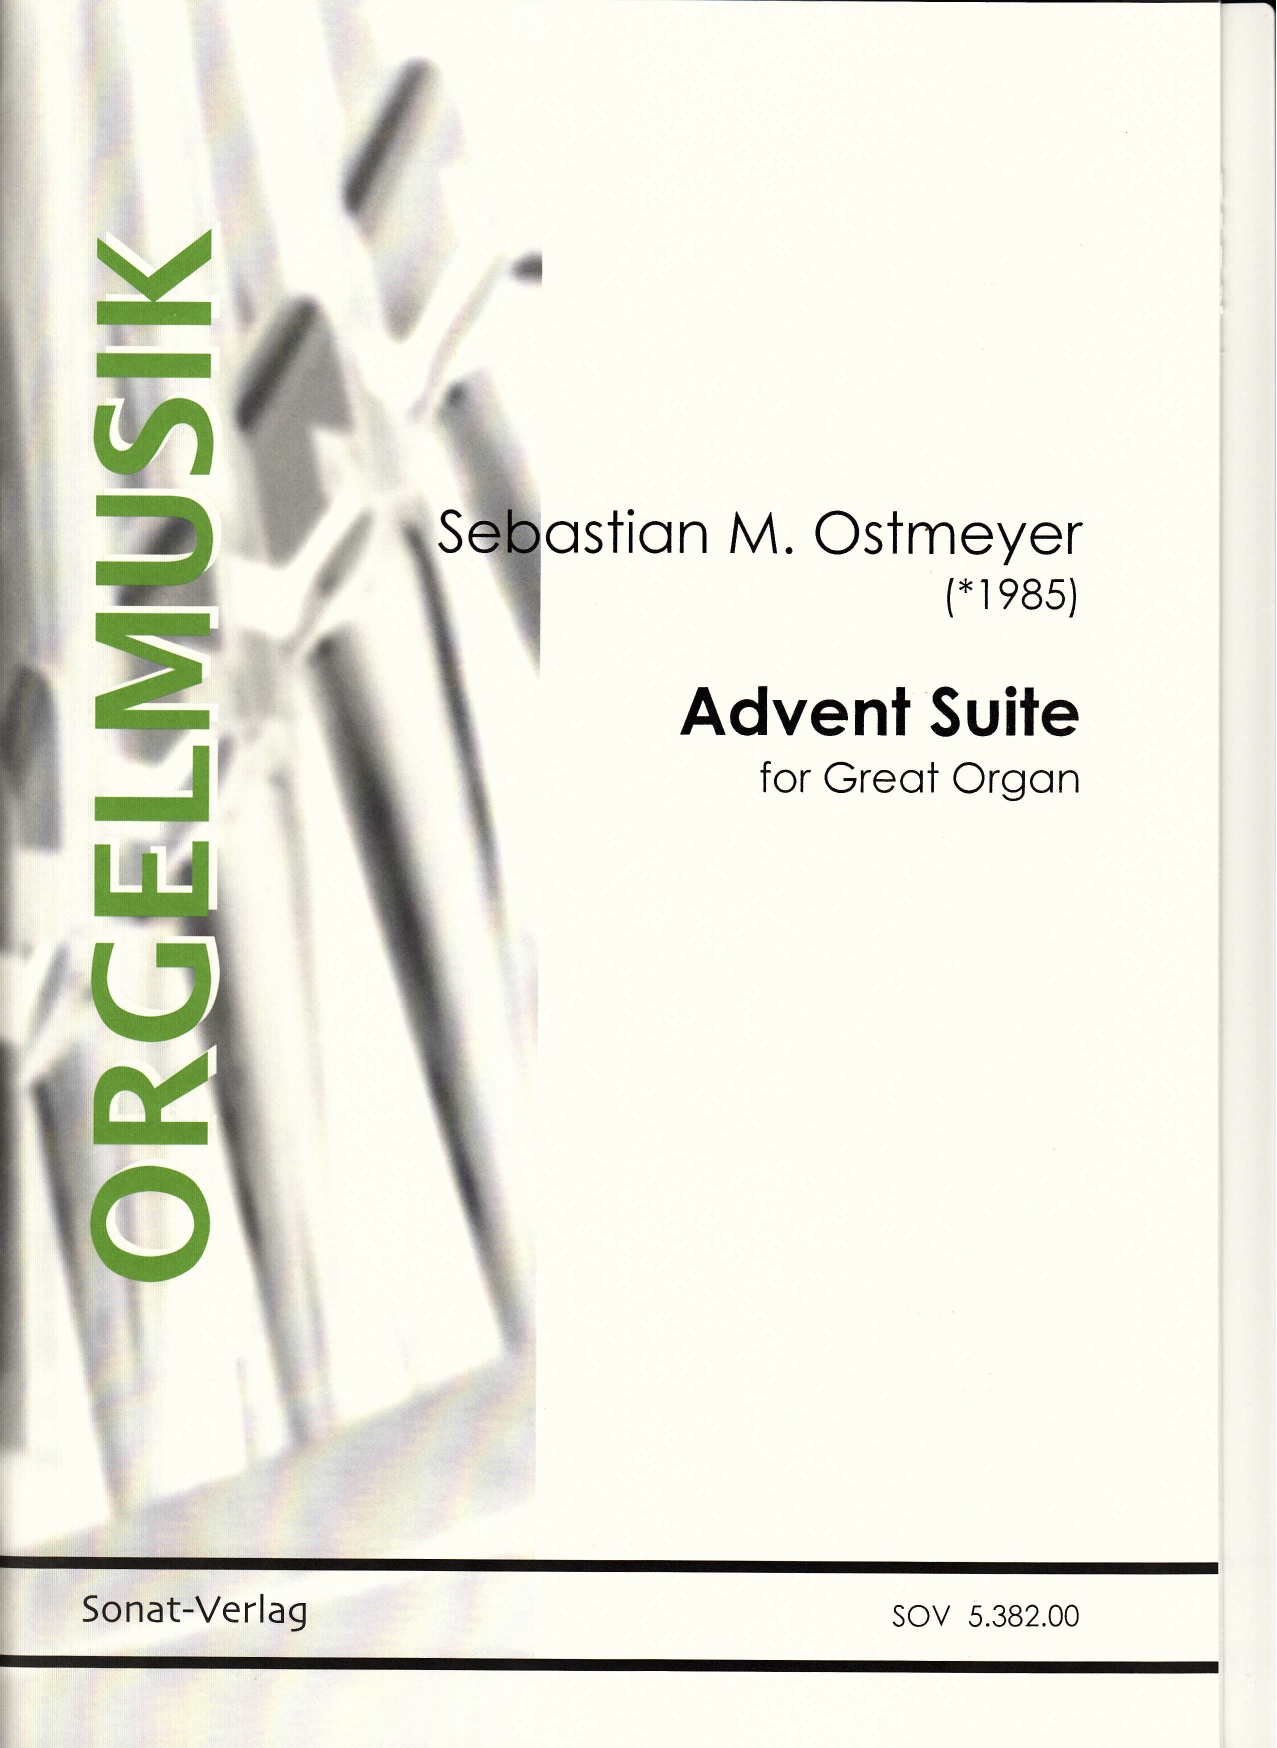 Ostmeyer, S. (*1985): Advent Suite